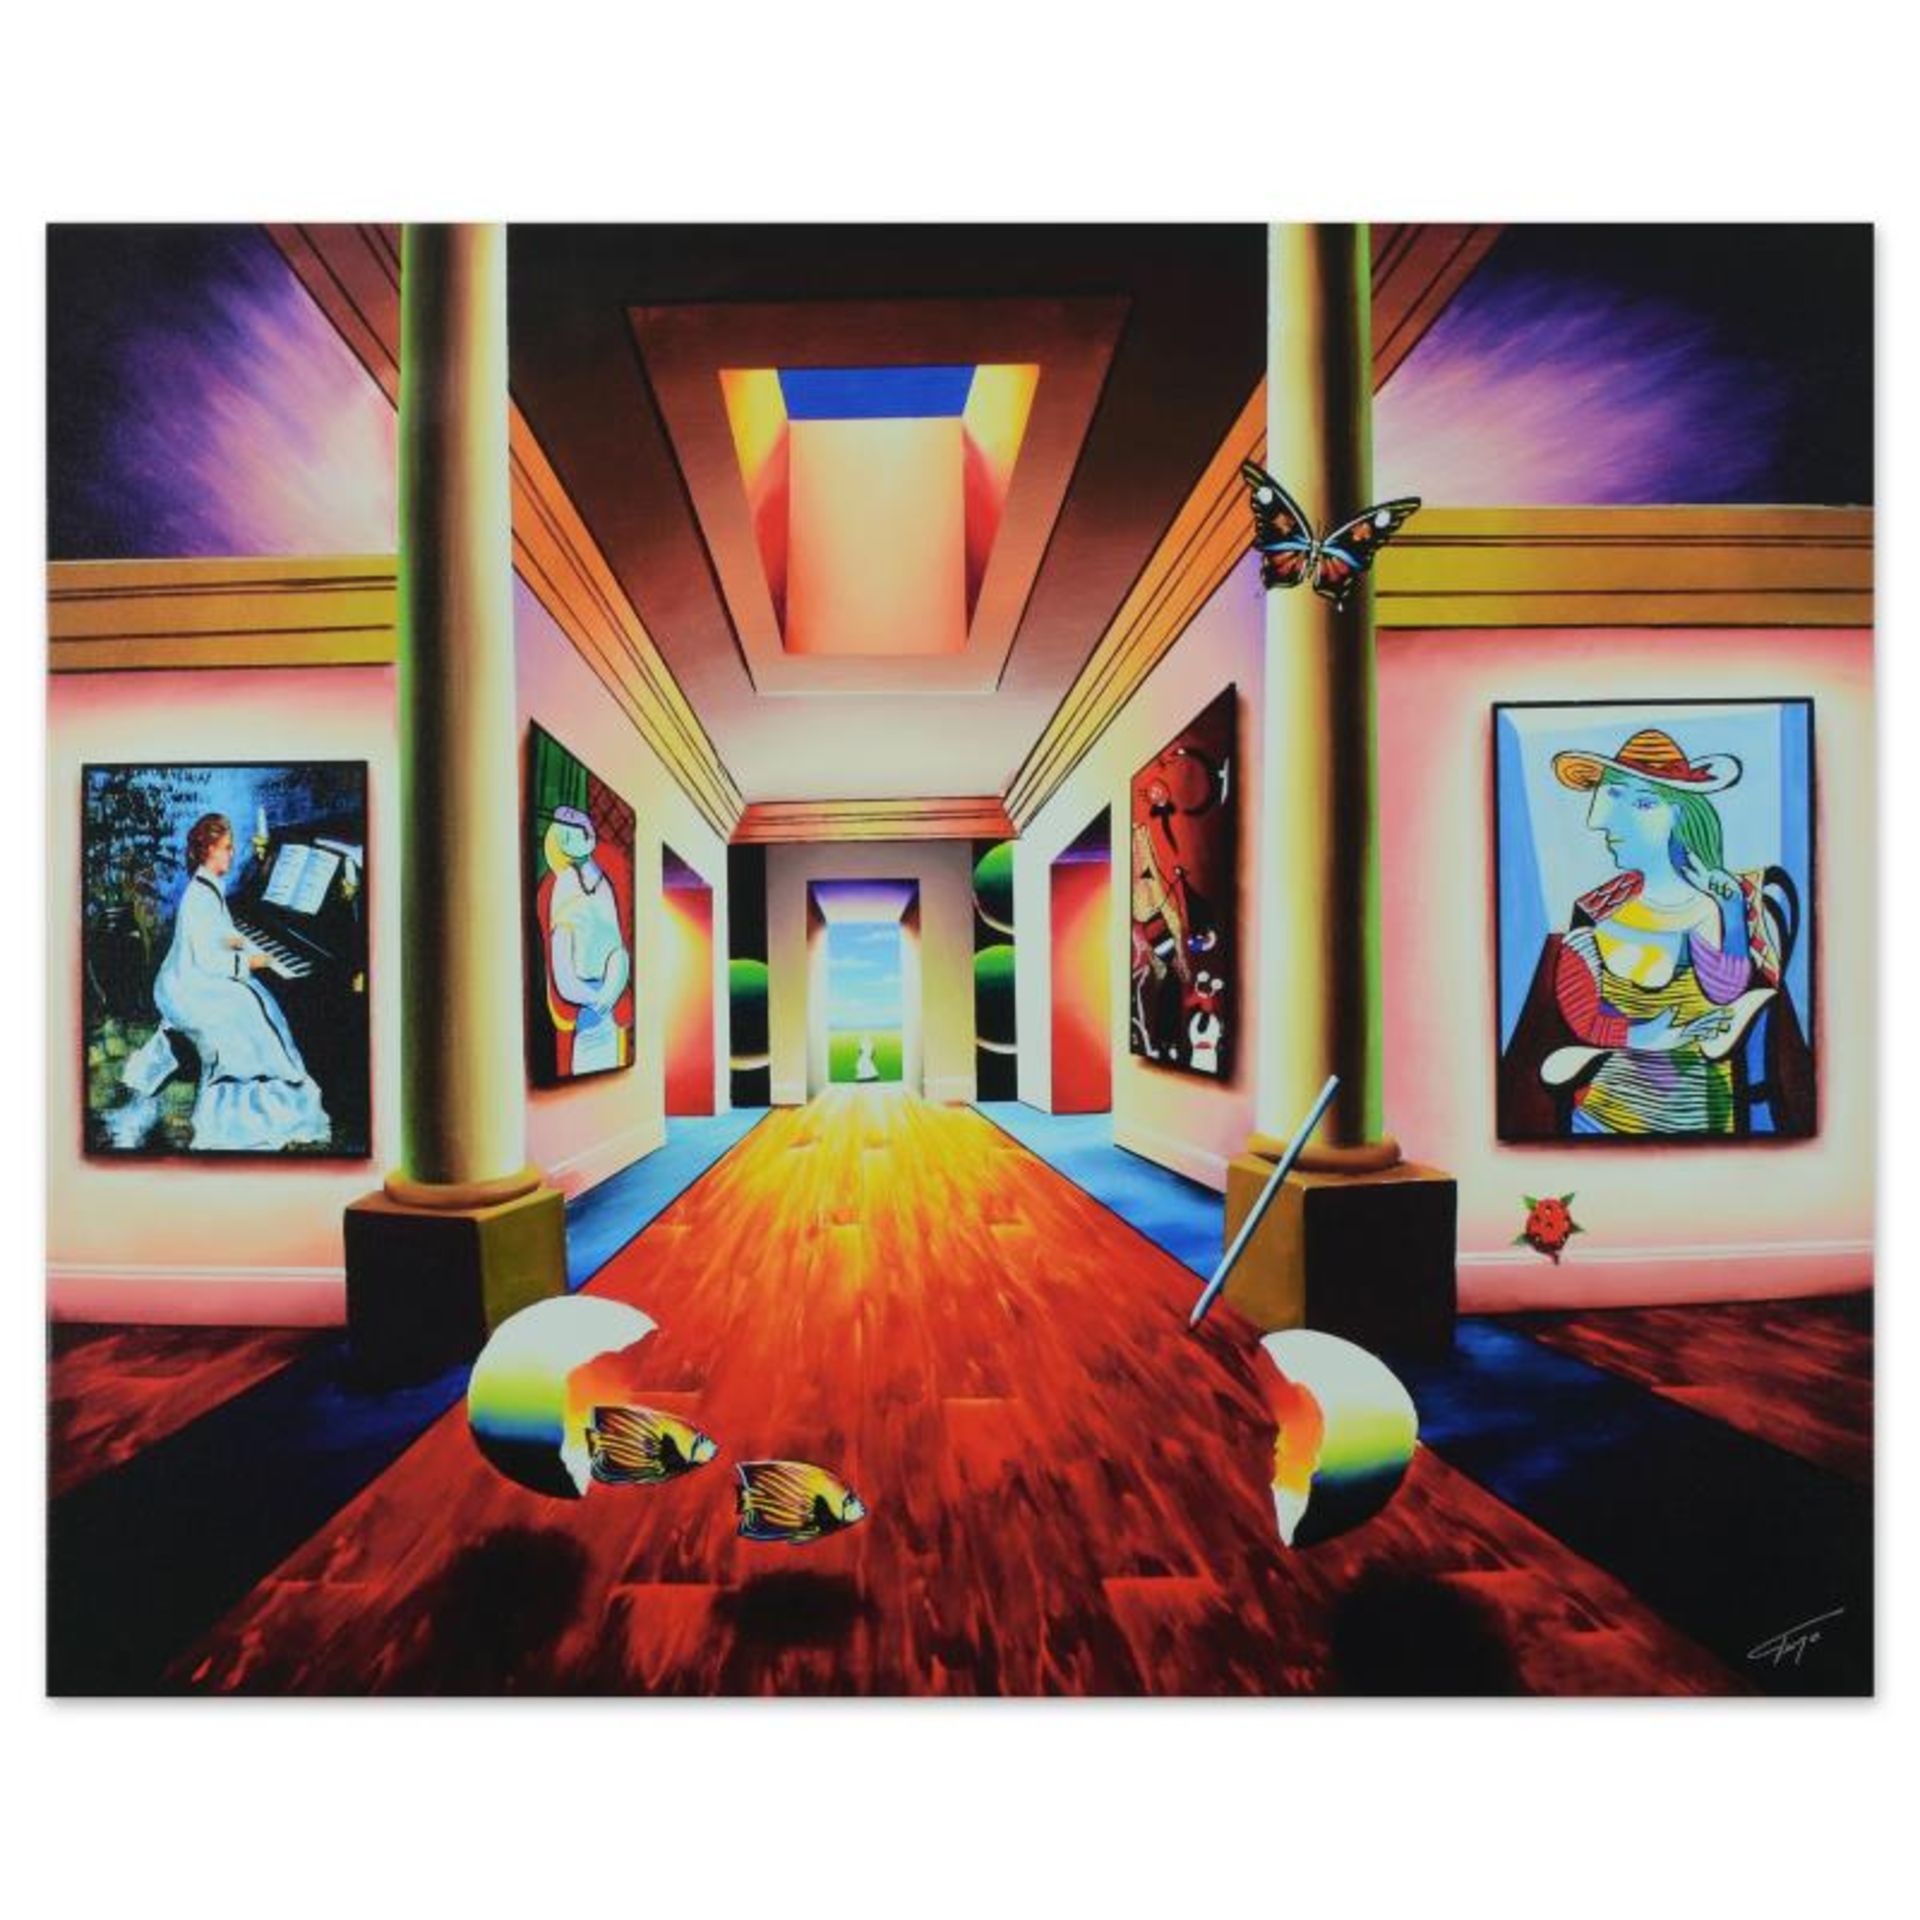 Ferjo, "Hallway of Grandeur" Limited Edition on Gallery Wrapped Canvas, Numbered